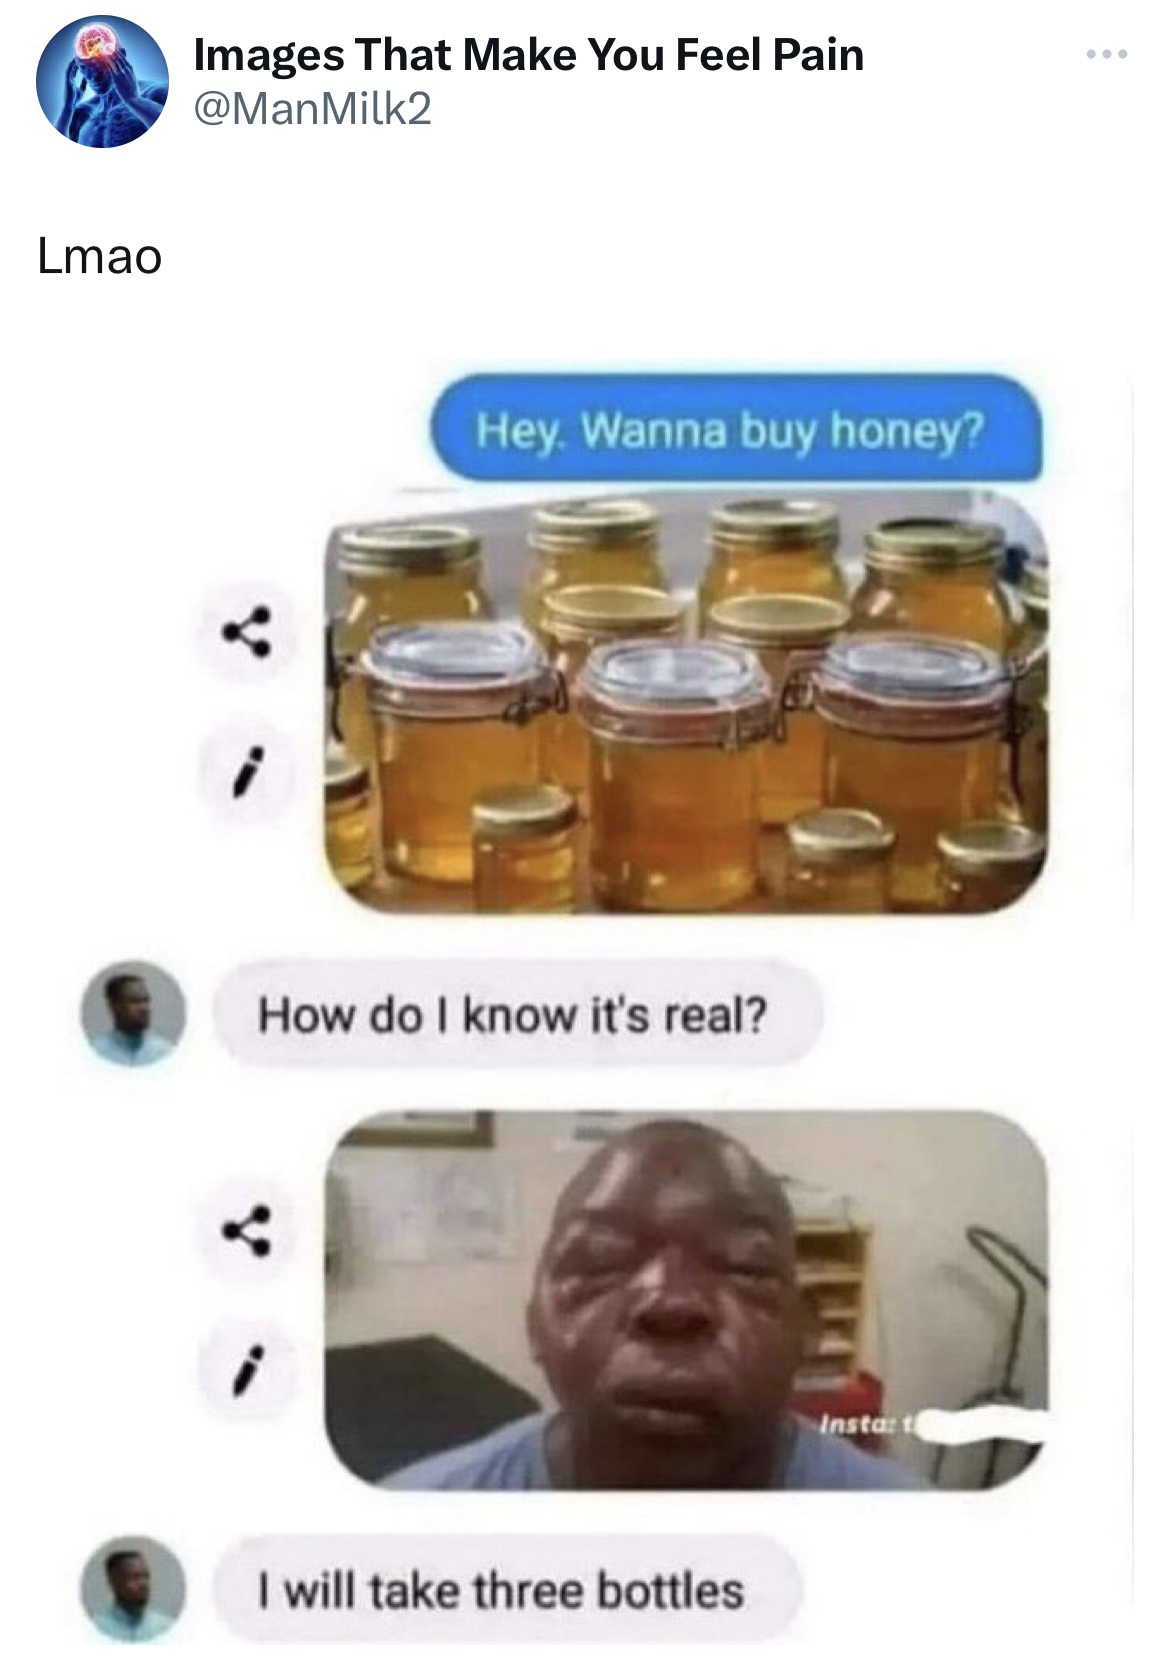 savage and salty tweets - glass bottle - Lmao Images That Make You Feel Pain Hey. Wanna buy honey? How do I know it's real? I will take three bottles